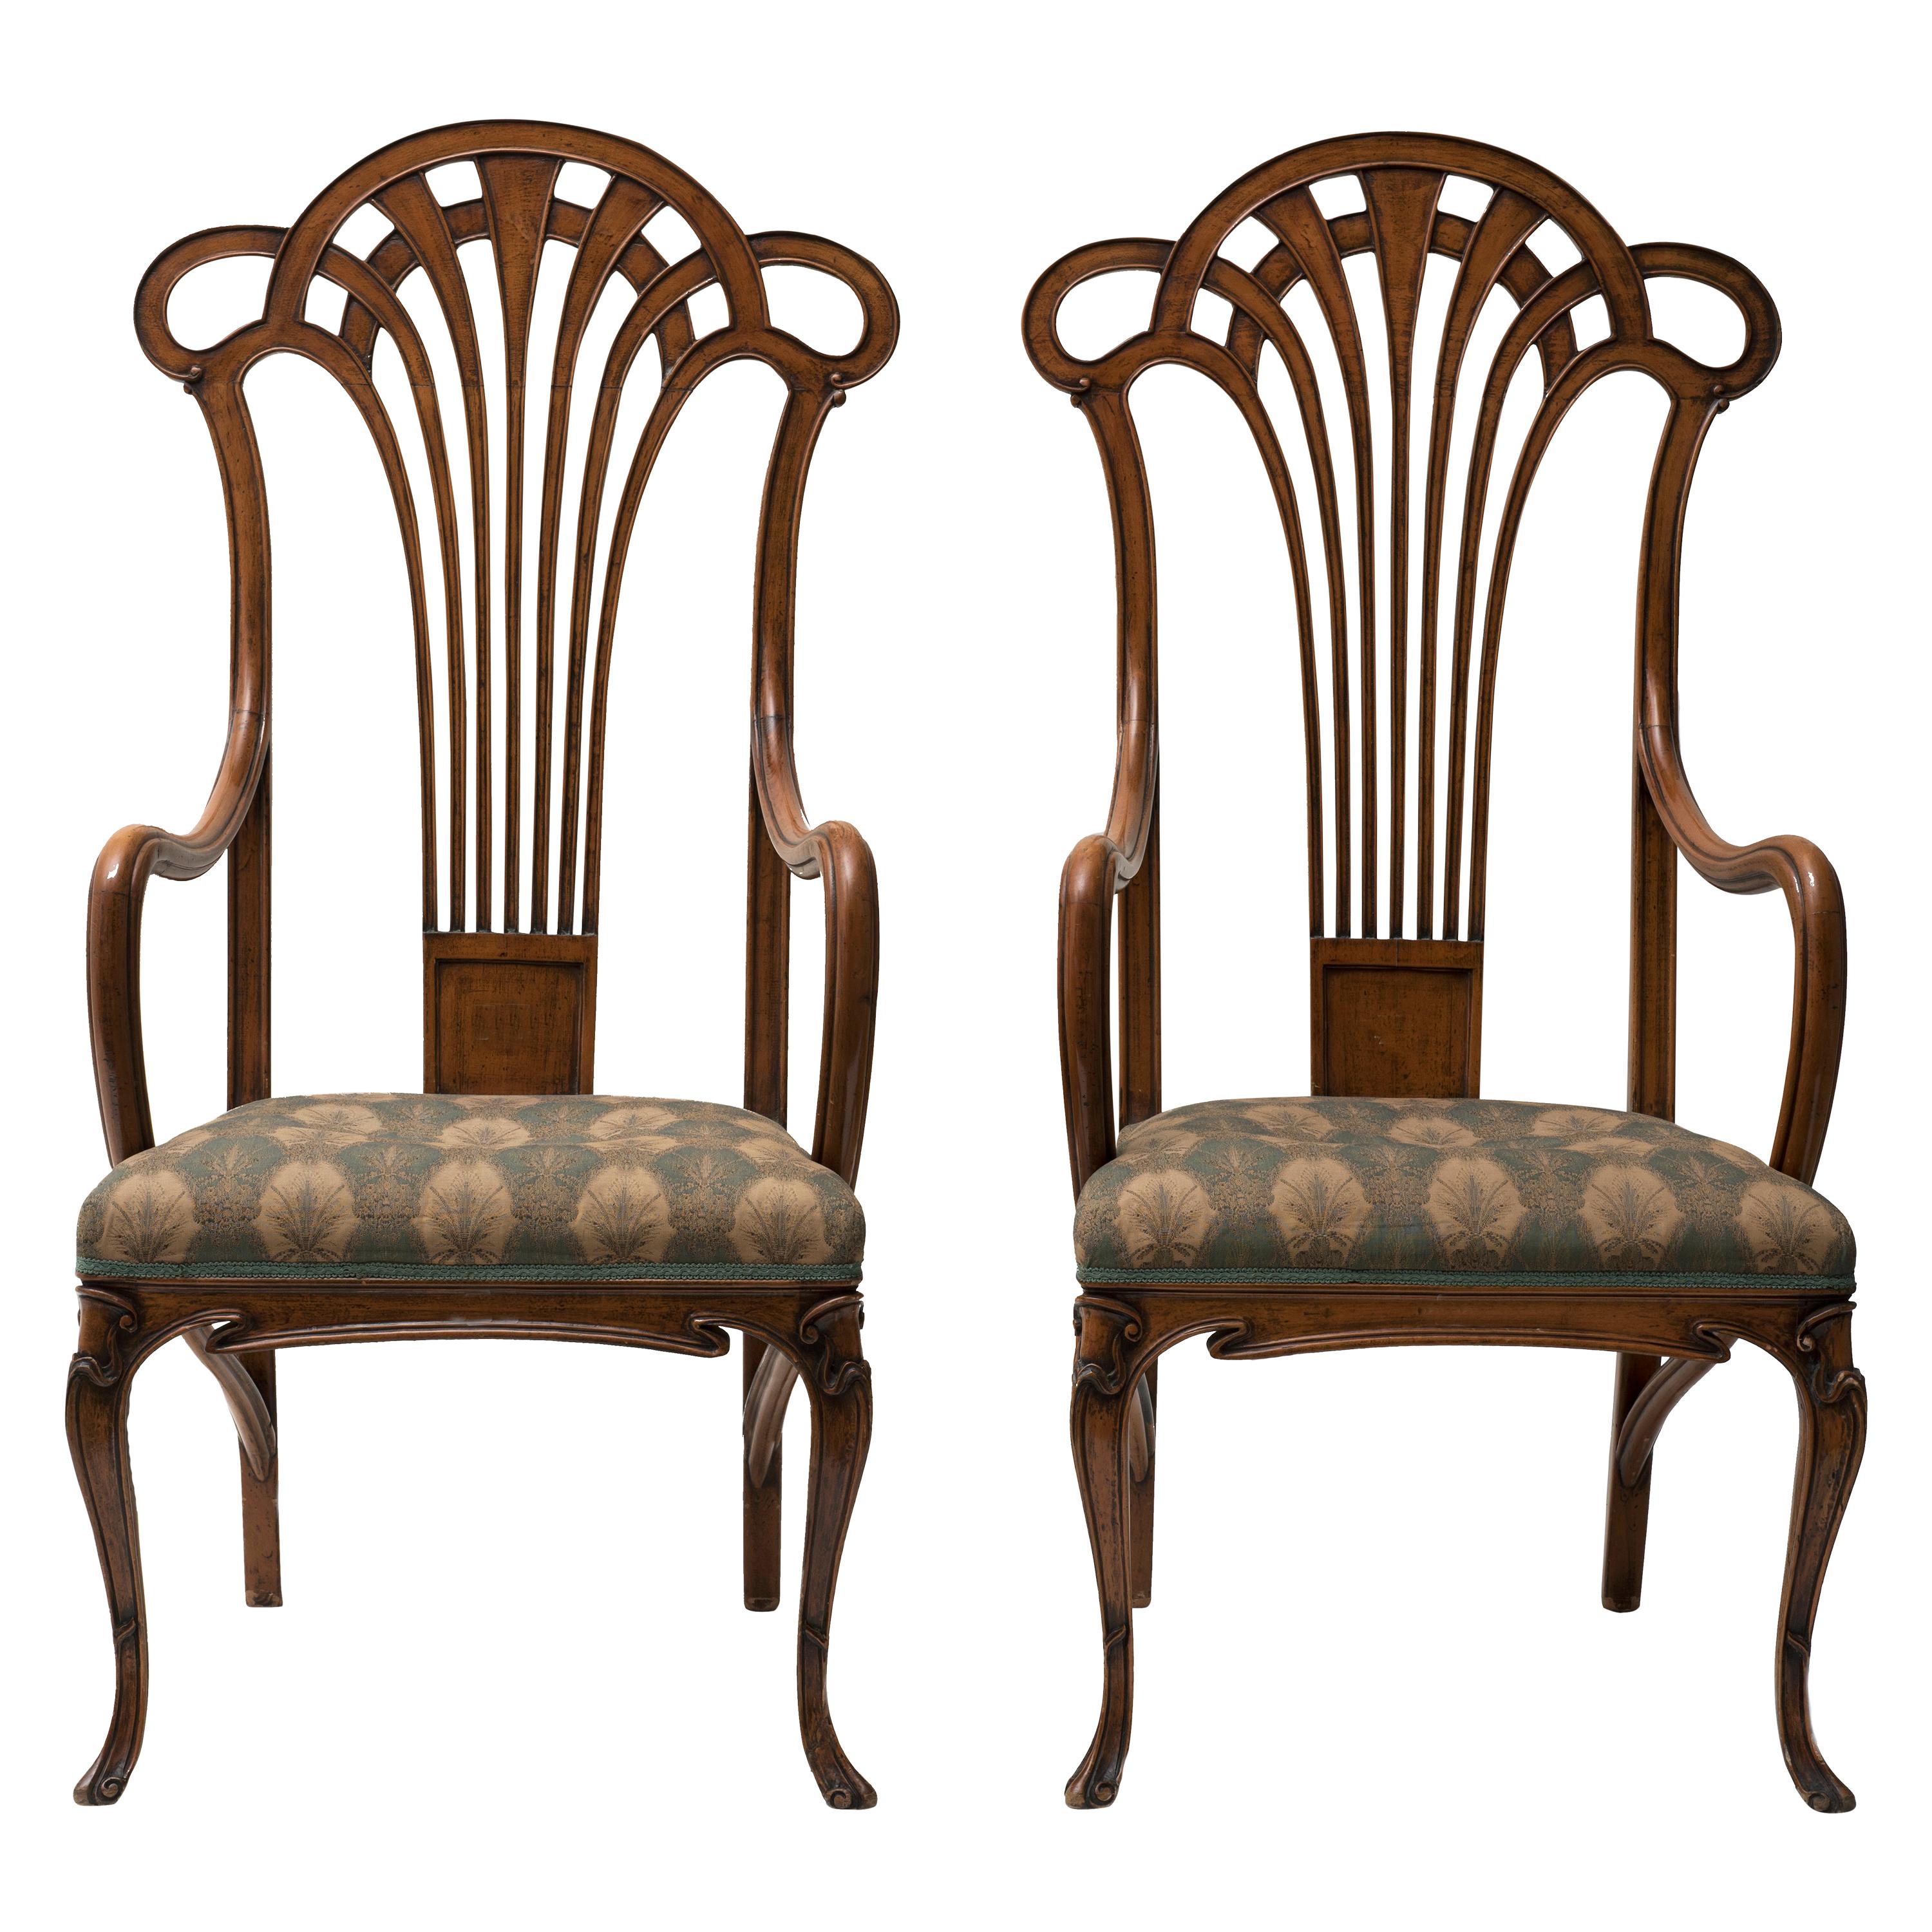 Pair of Vintage Wooden Liberty Armchairs, 19th-20th Century